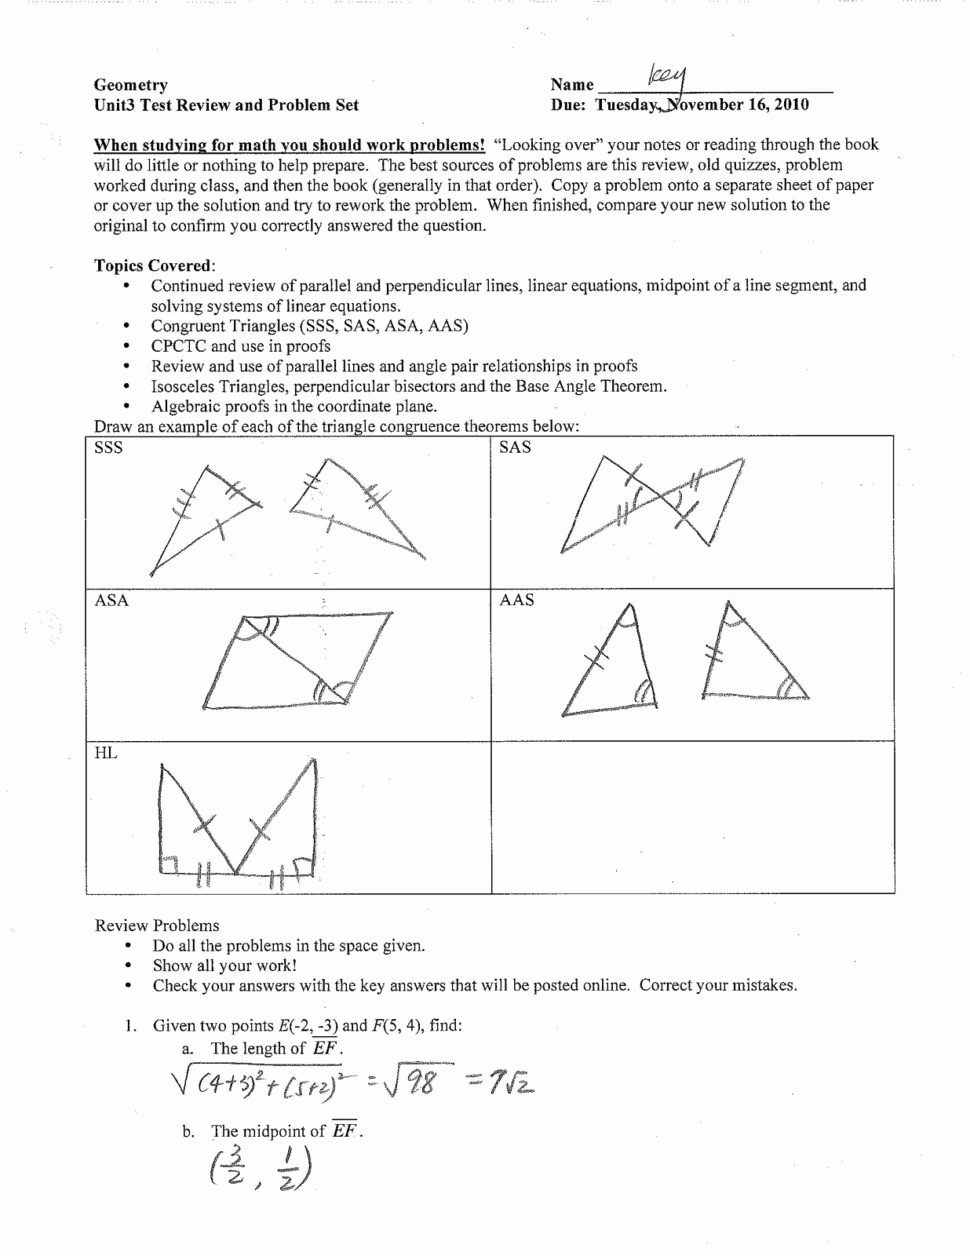 Congruent Triangles Worksheet Answer Key Awesome Geometry Worksheet Congruent Triangles Answer Key the Best